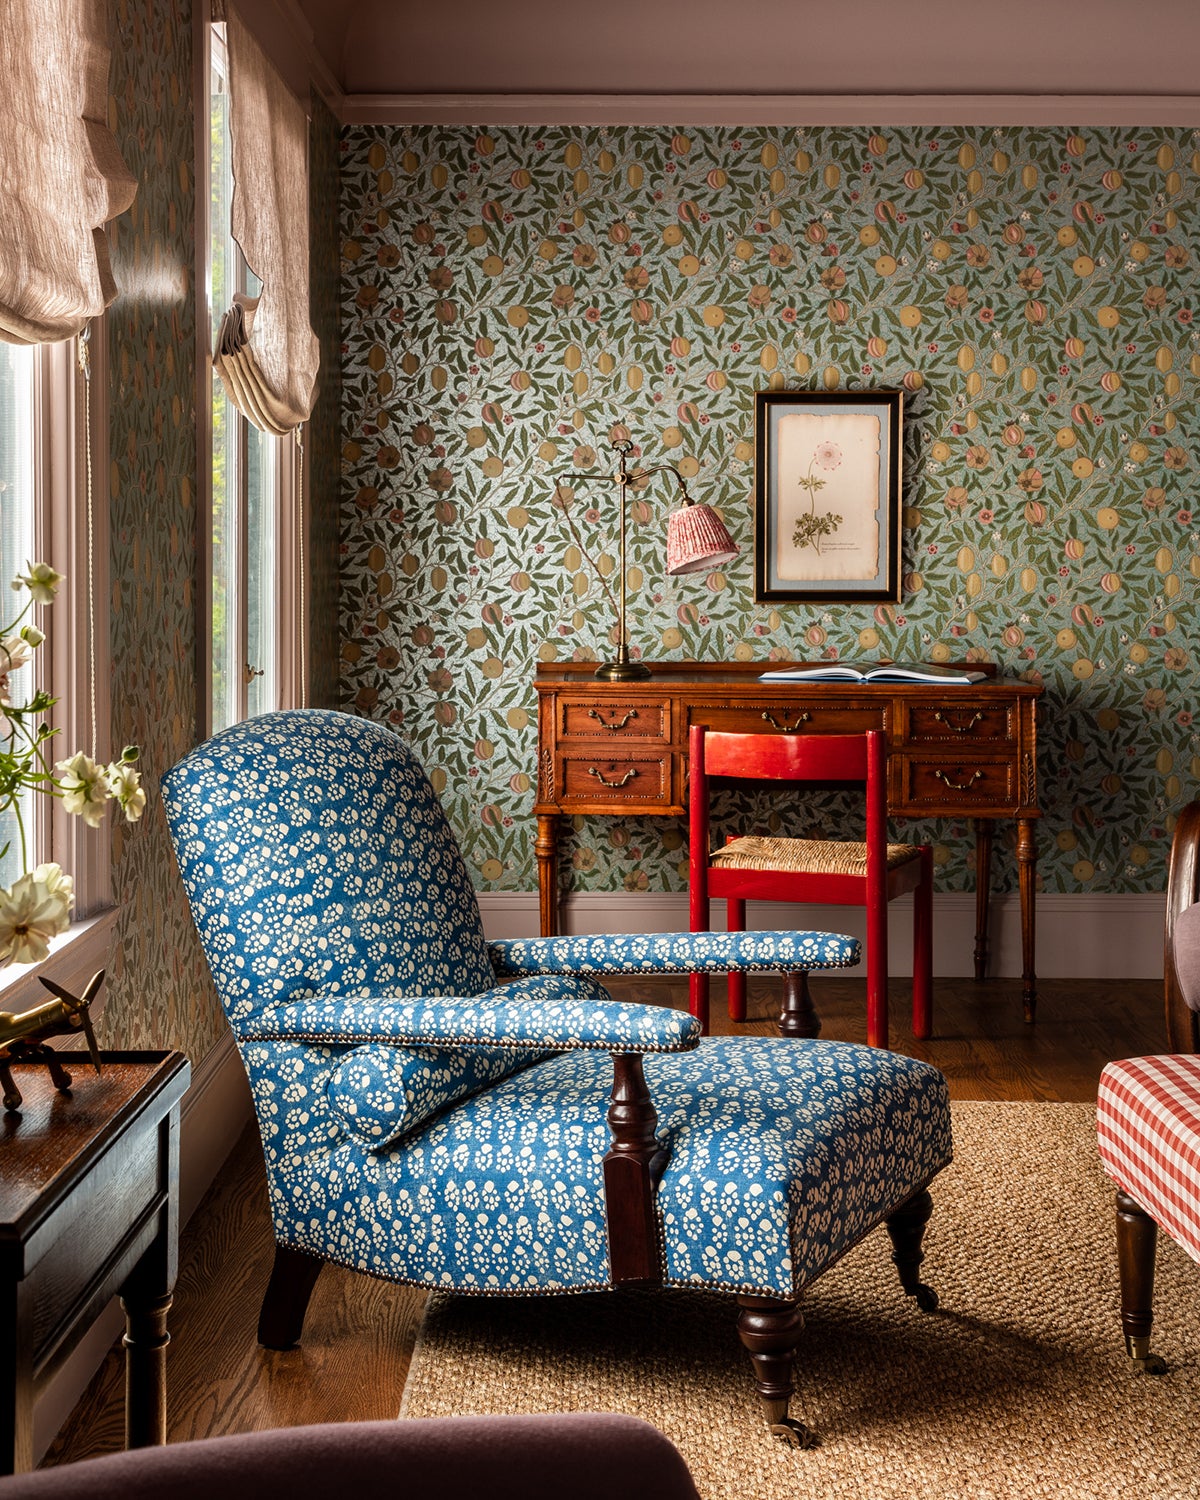 Living room with patterned chair and wallpaper